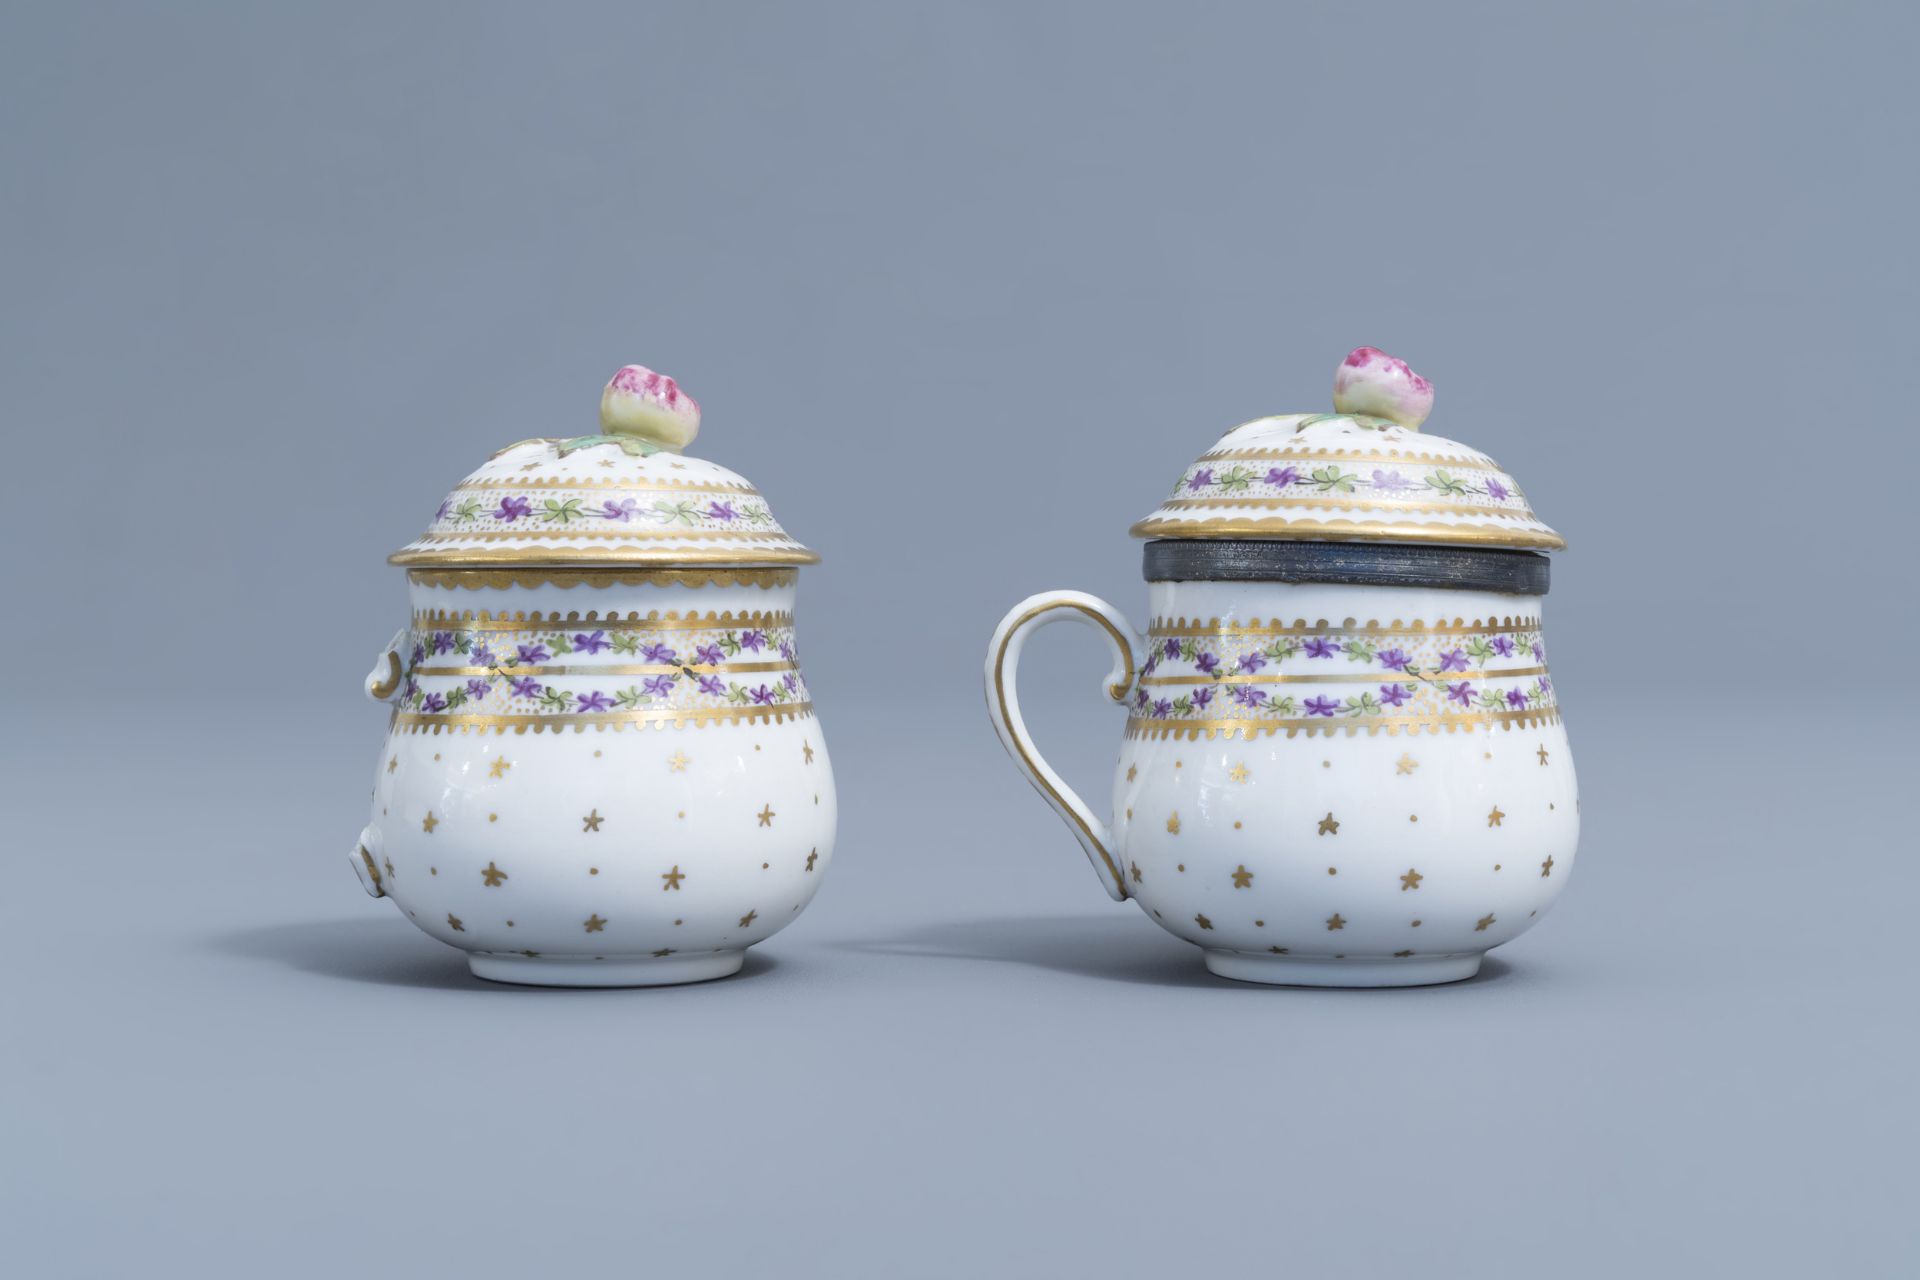 A pair of bue and white faience fine salts and five cream jars, Luxemburg and France, 18th/19th C. - Image 20 of 46